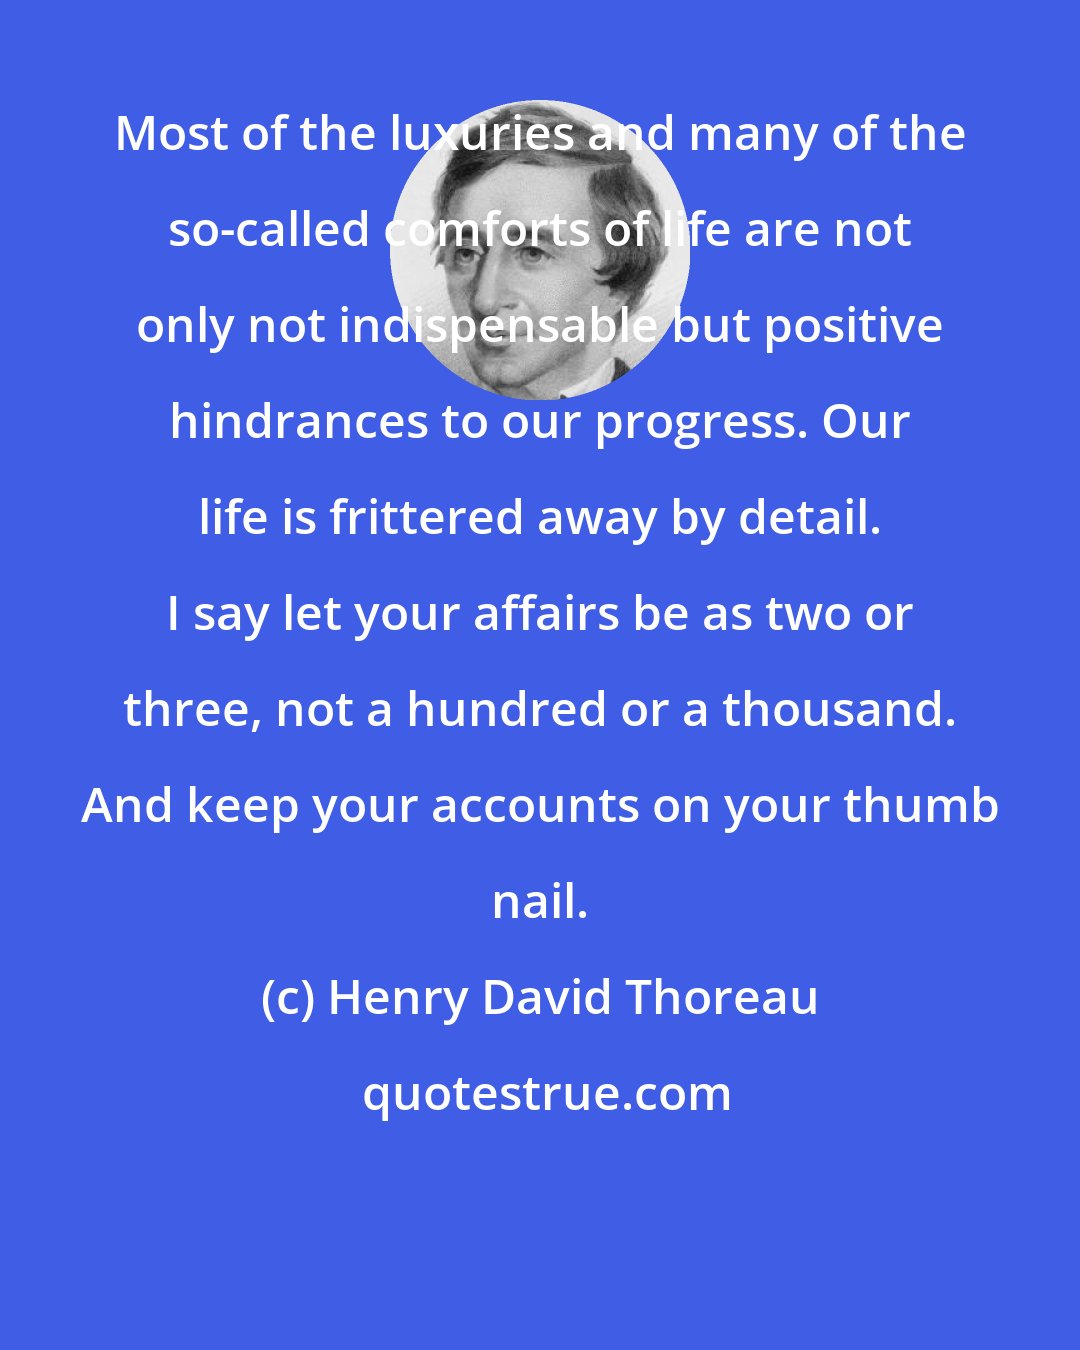 Henry David Thoreau: Most of the luxuries and many of the so-called comforts of life are not only not indispensable but positive hindrances to our progress. Our life is frittered away by detail. I say let your affairs be as two or three, not a hundred or a thousand. And keep your accounts on your thumb nail.